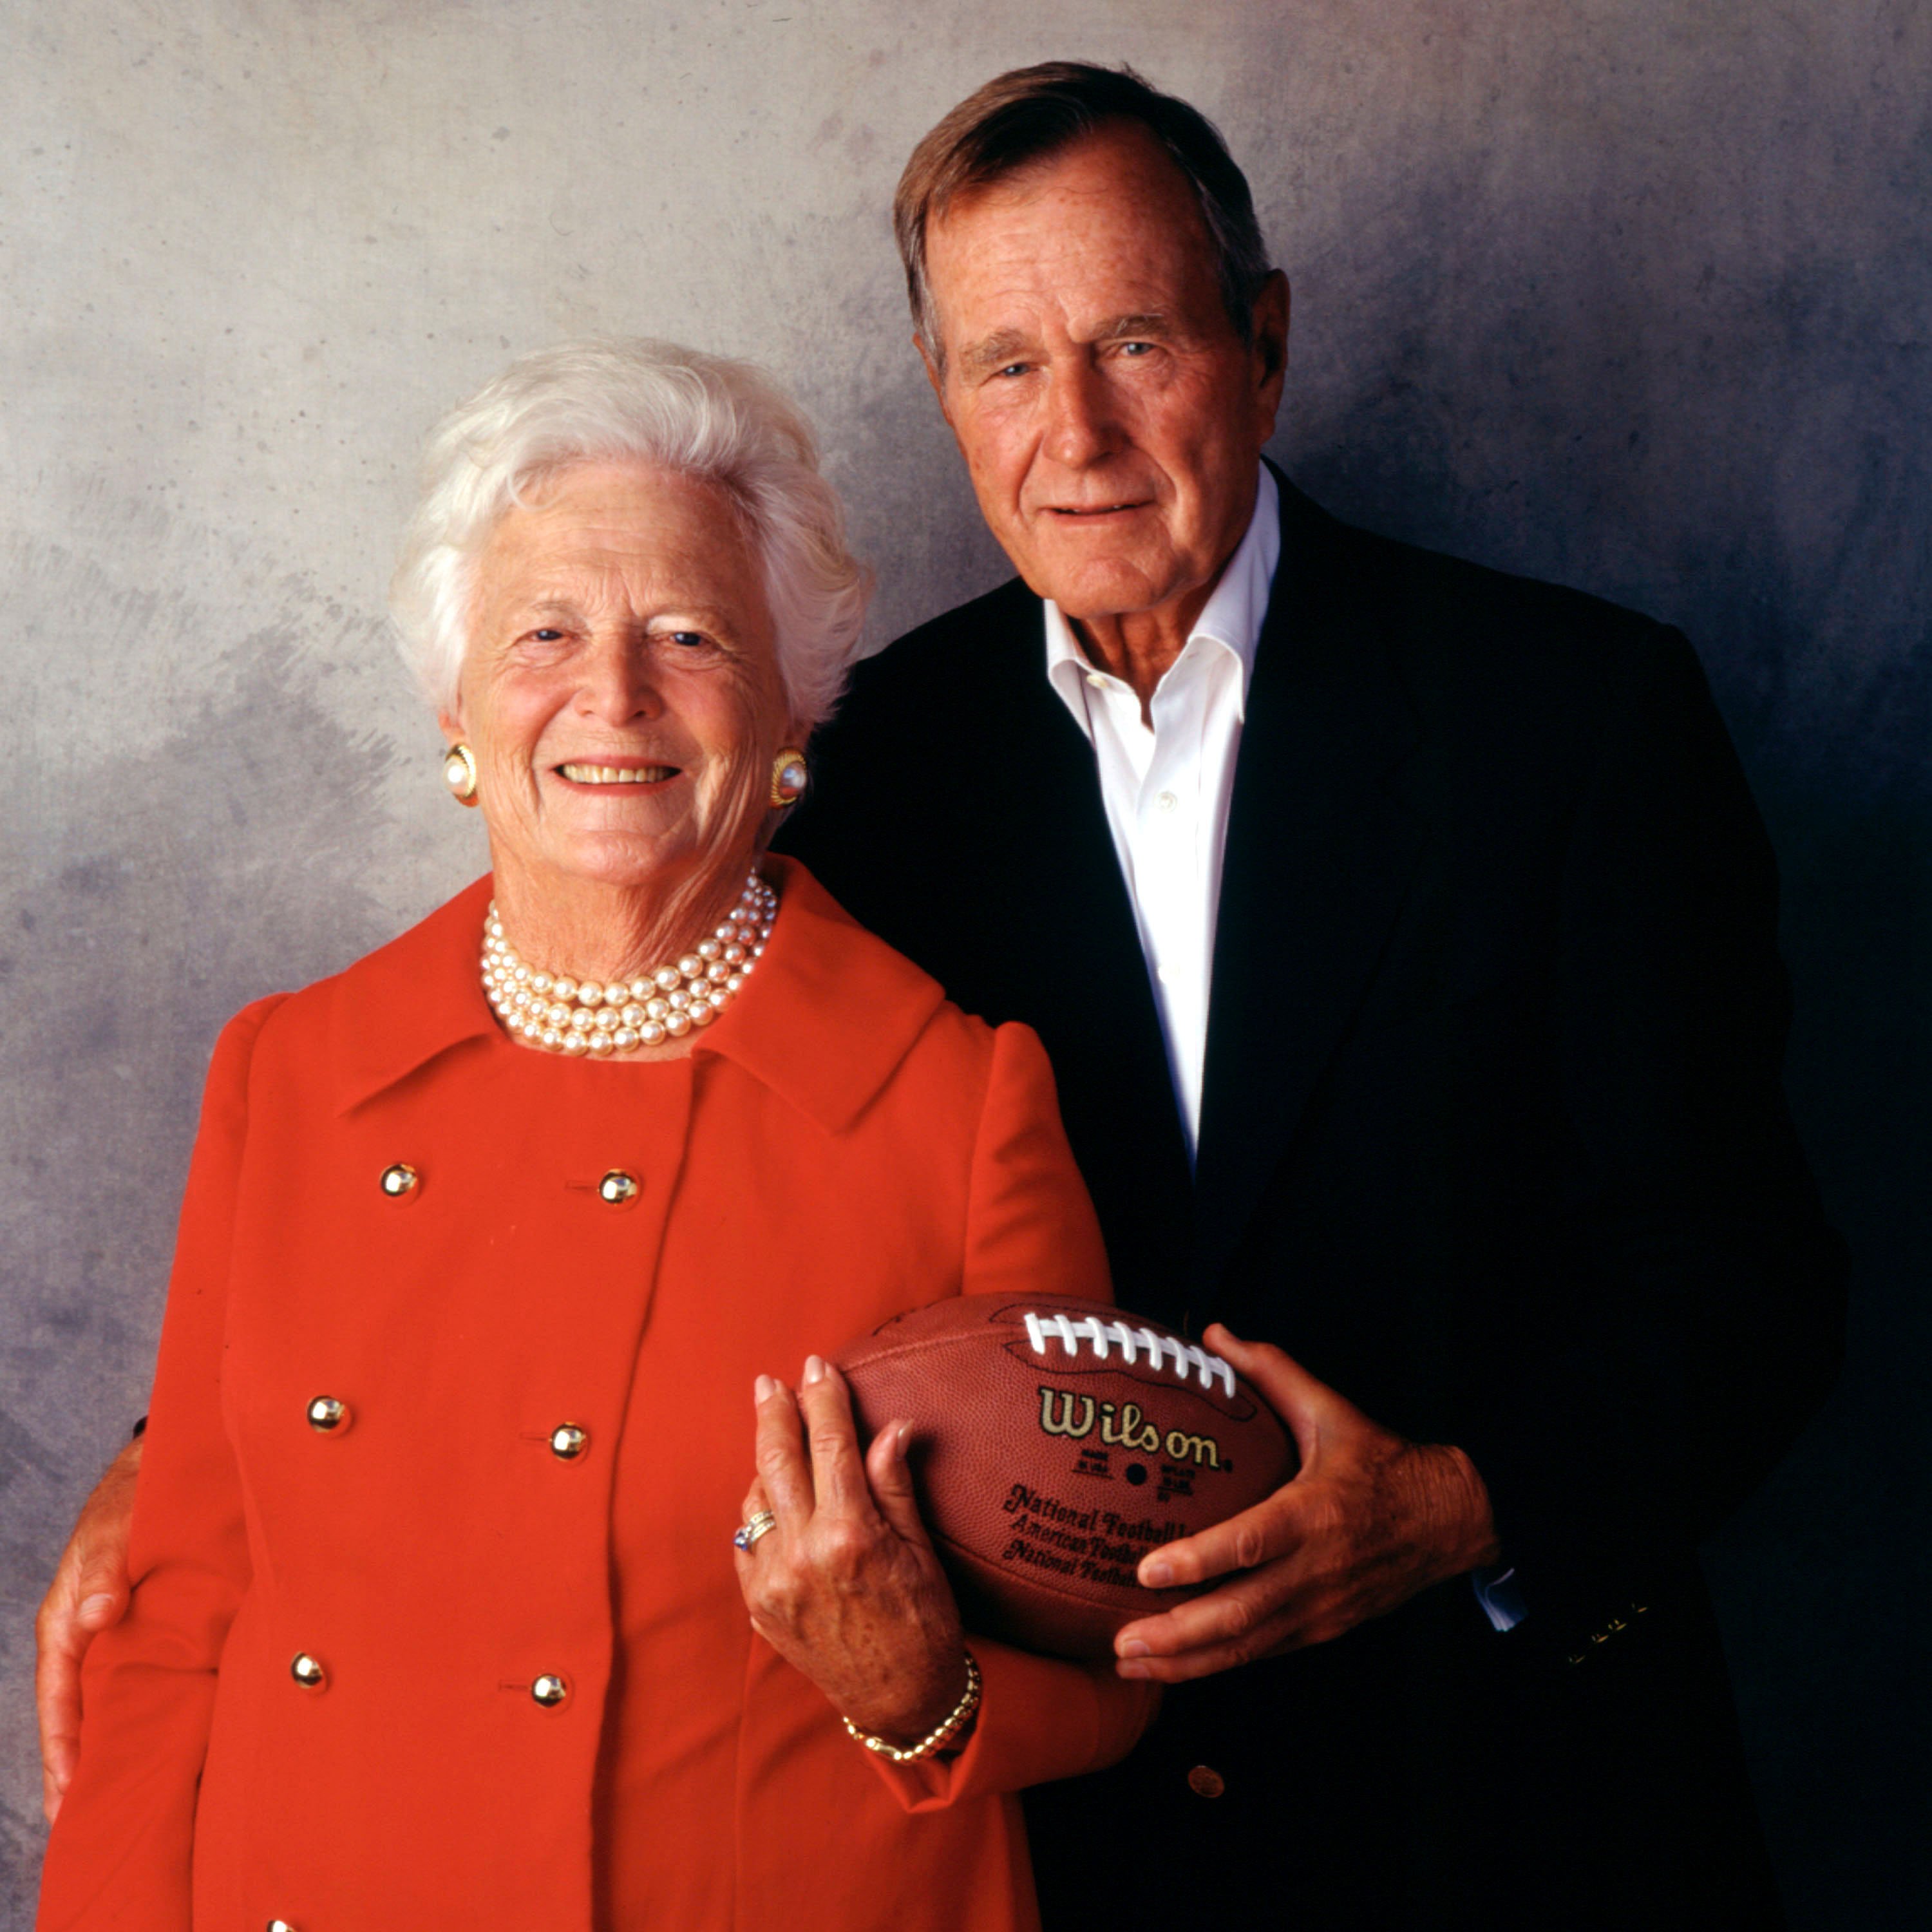 Barbara and George Bush. I Image: Getty Images.